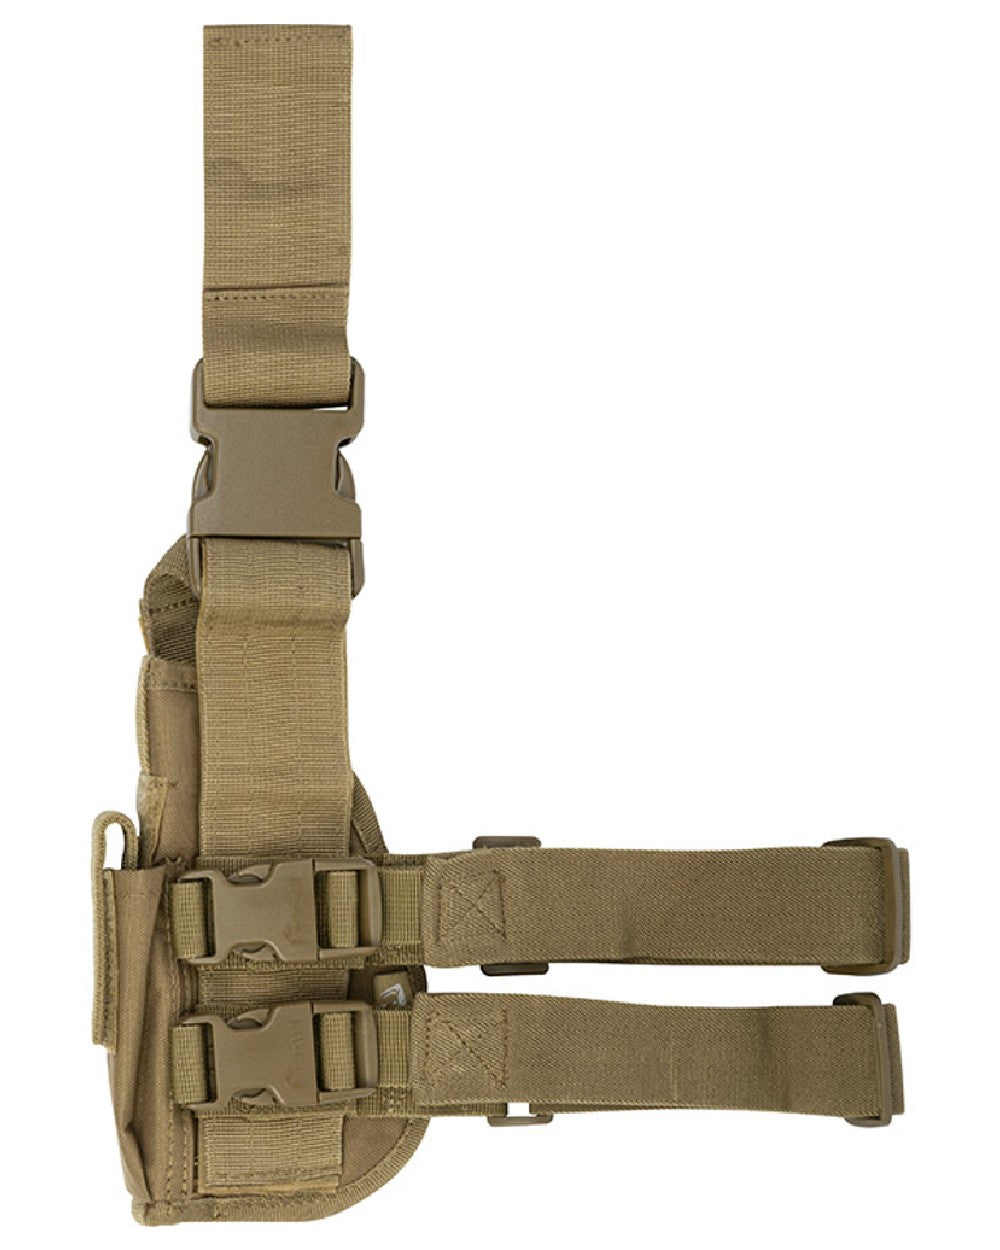 Viper Tactical Leg Holster in Coyote 